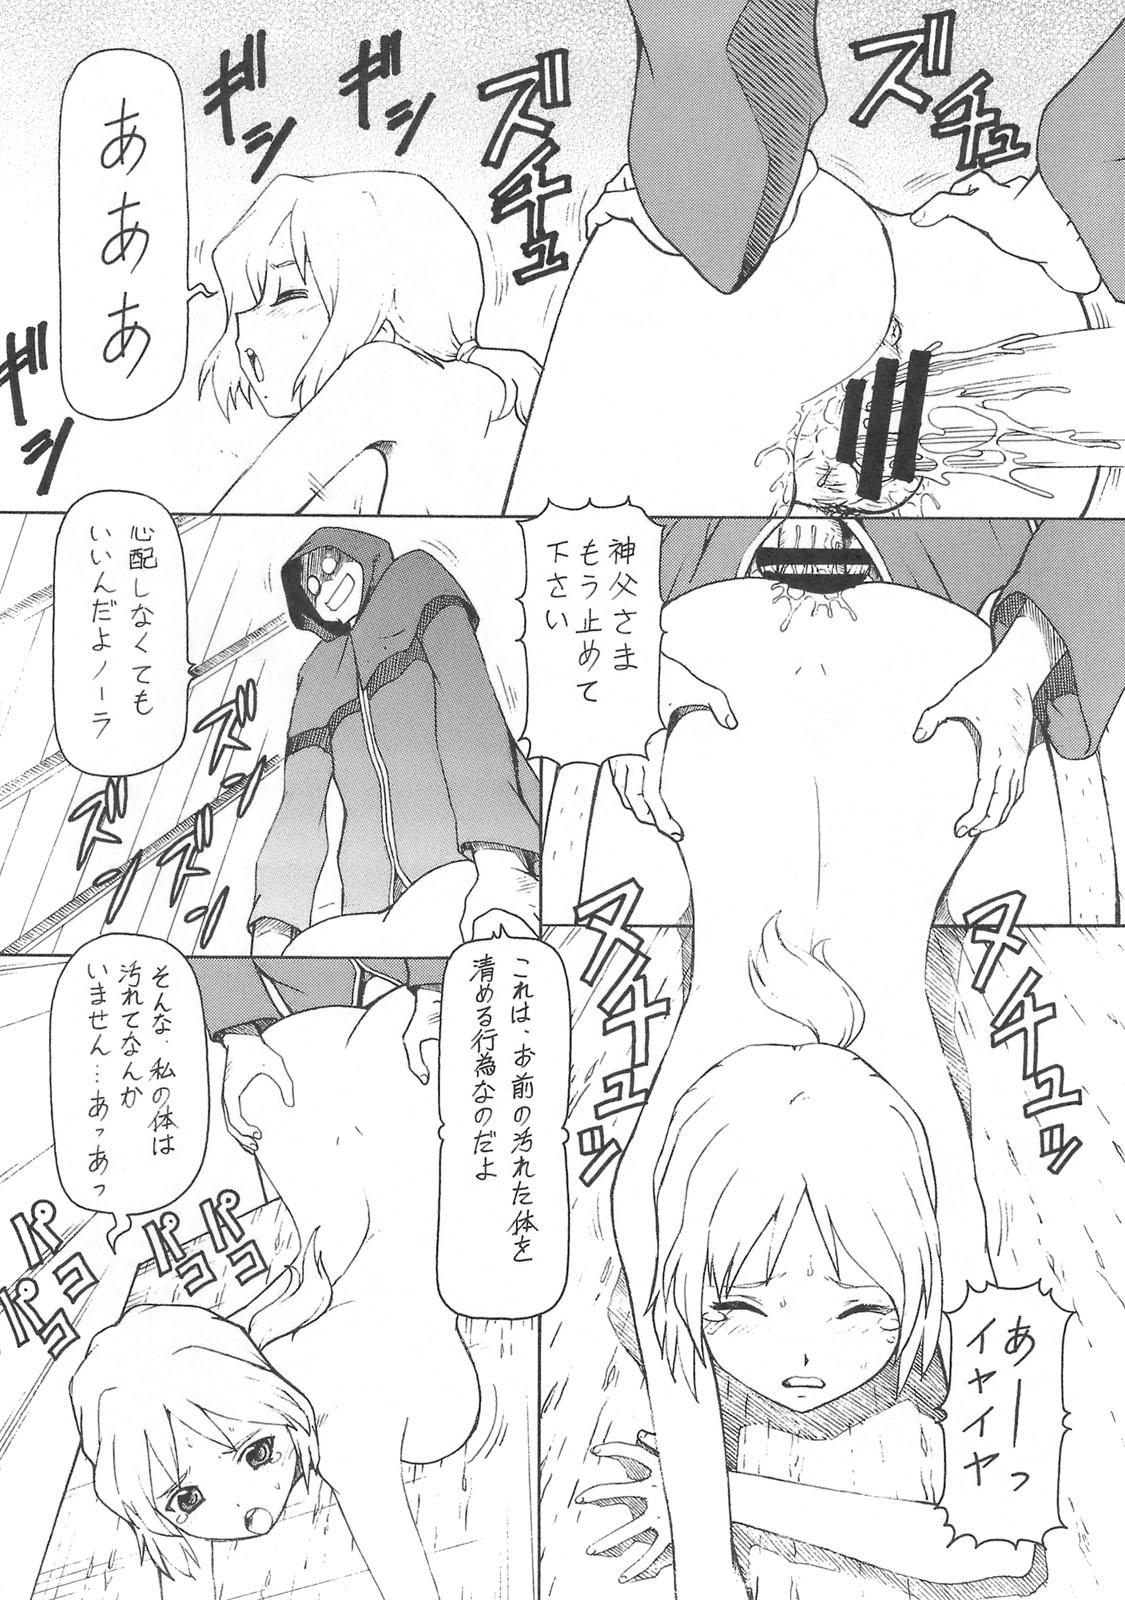 Masseuse Ookami to Butter Inu - Spice and wolf English - Page 3